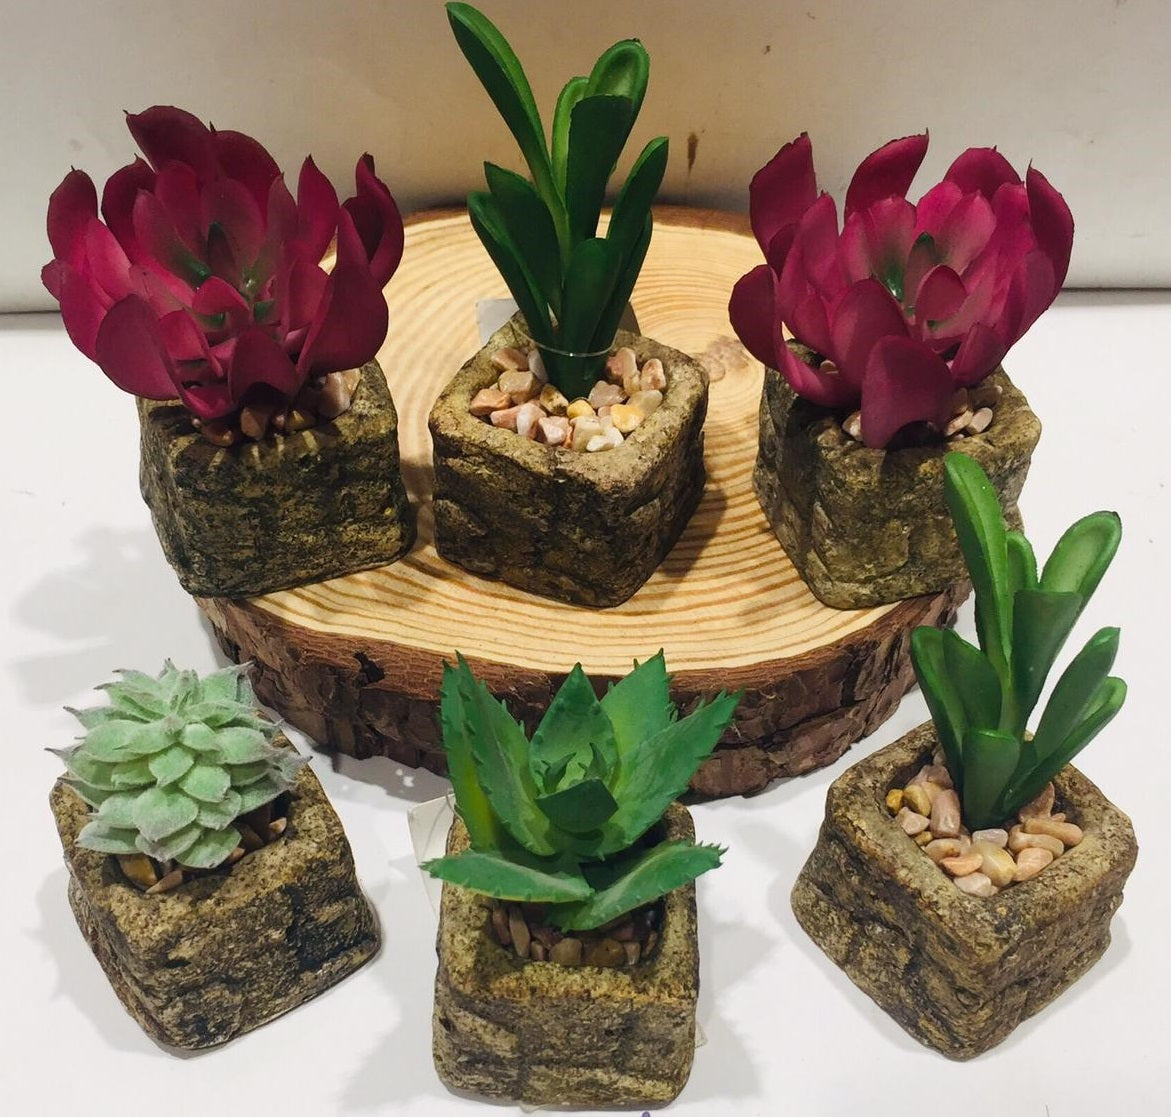 Sweet Mini Succulents With Pots & Stones For Indoor Décor Plants By Tamrapatra